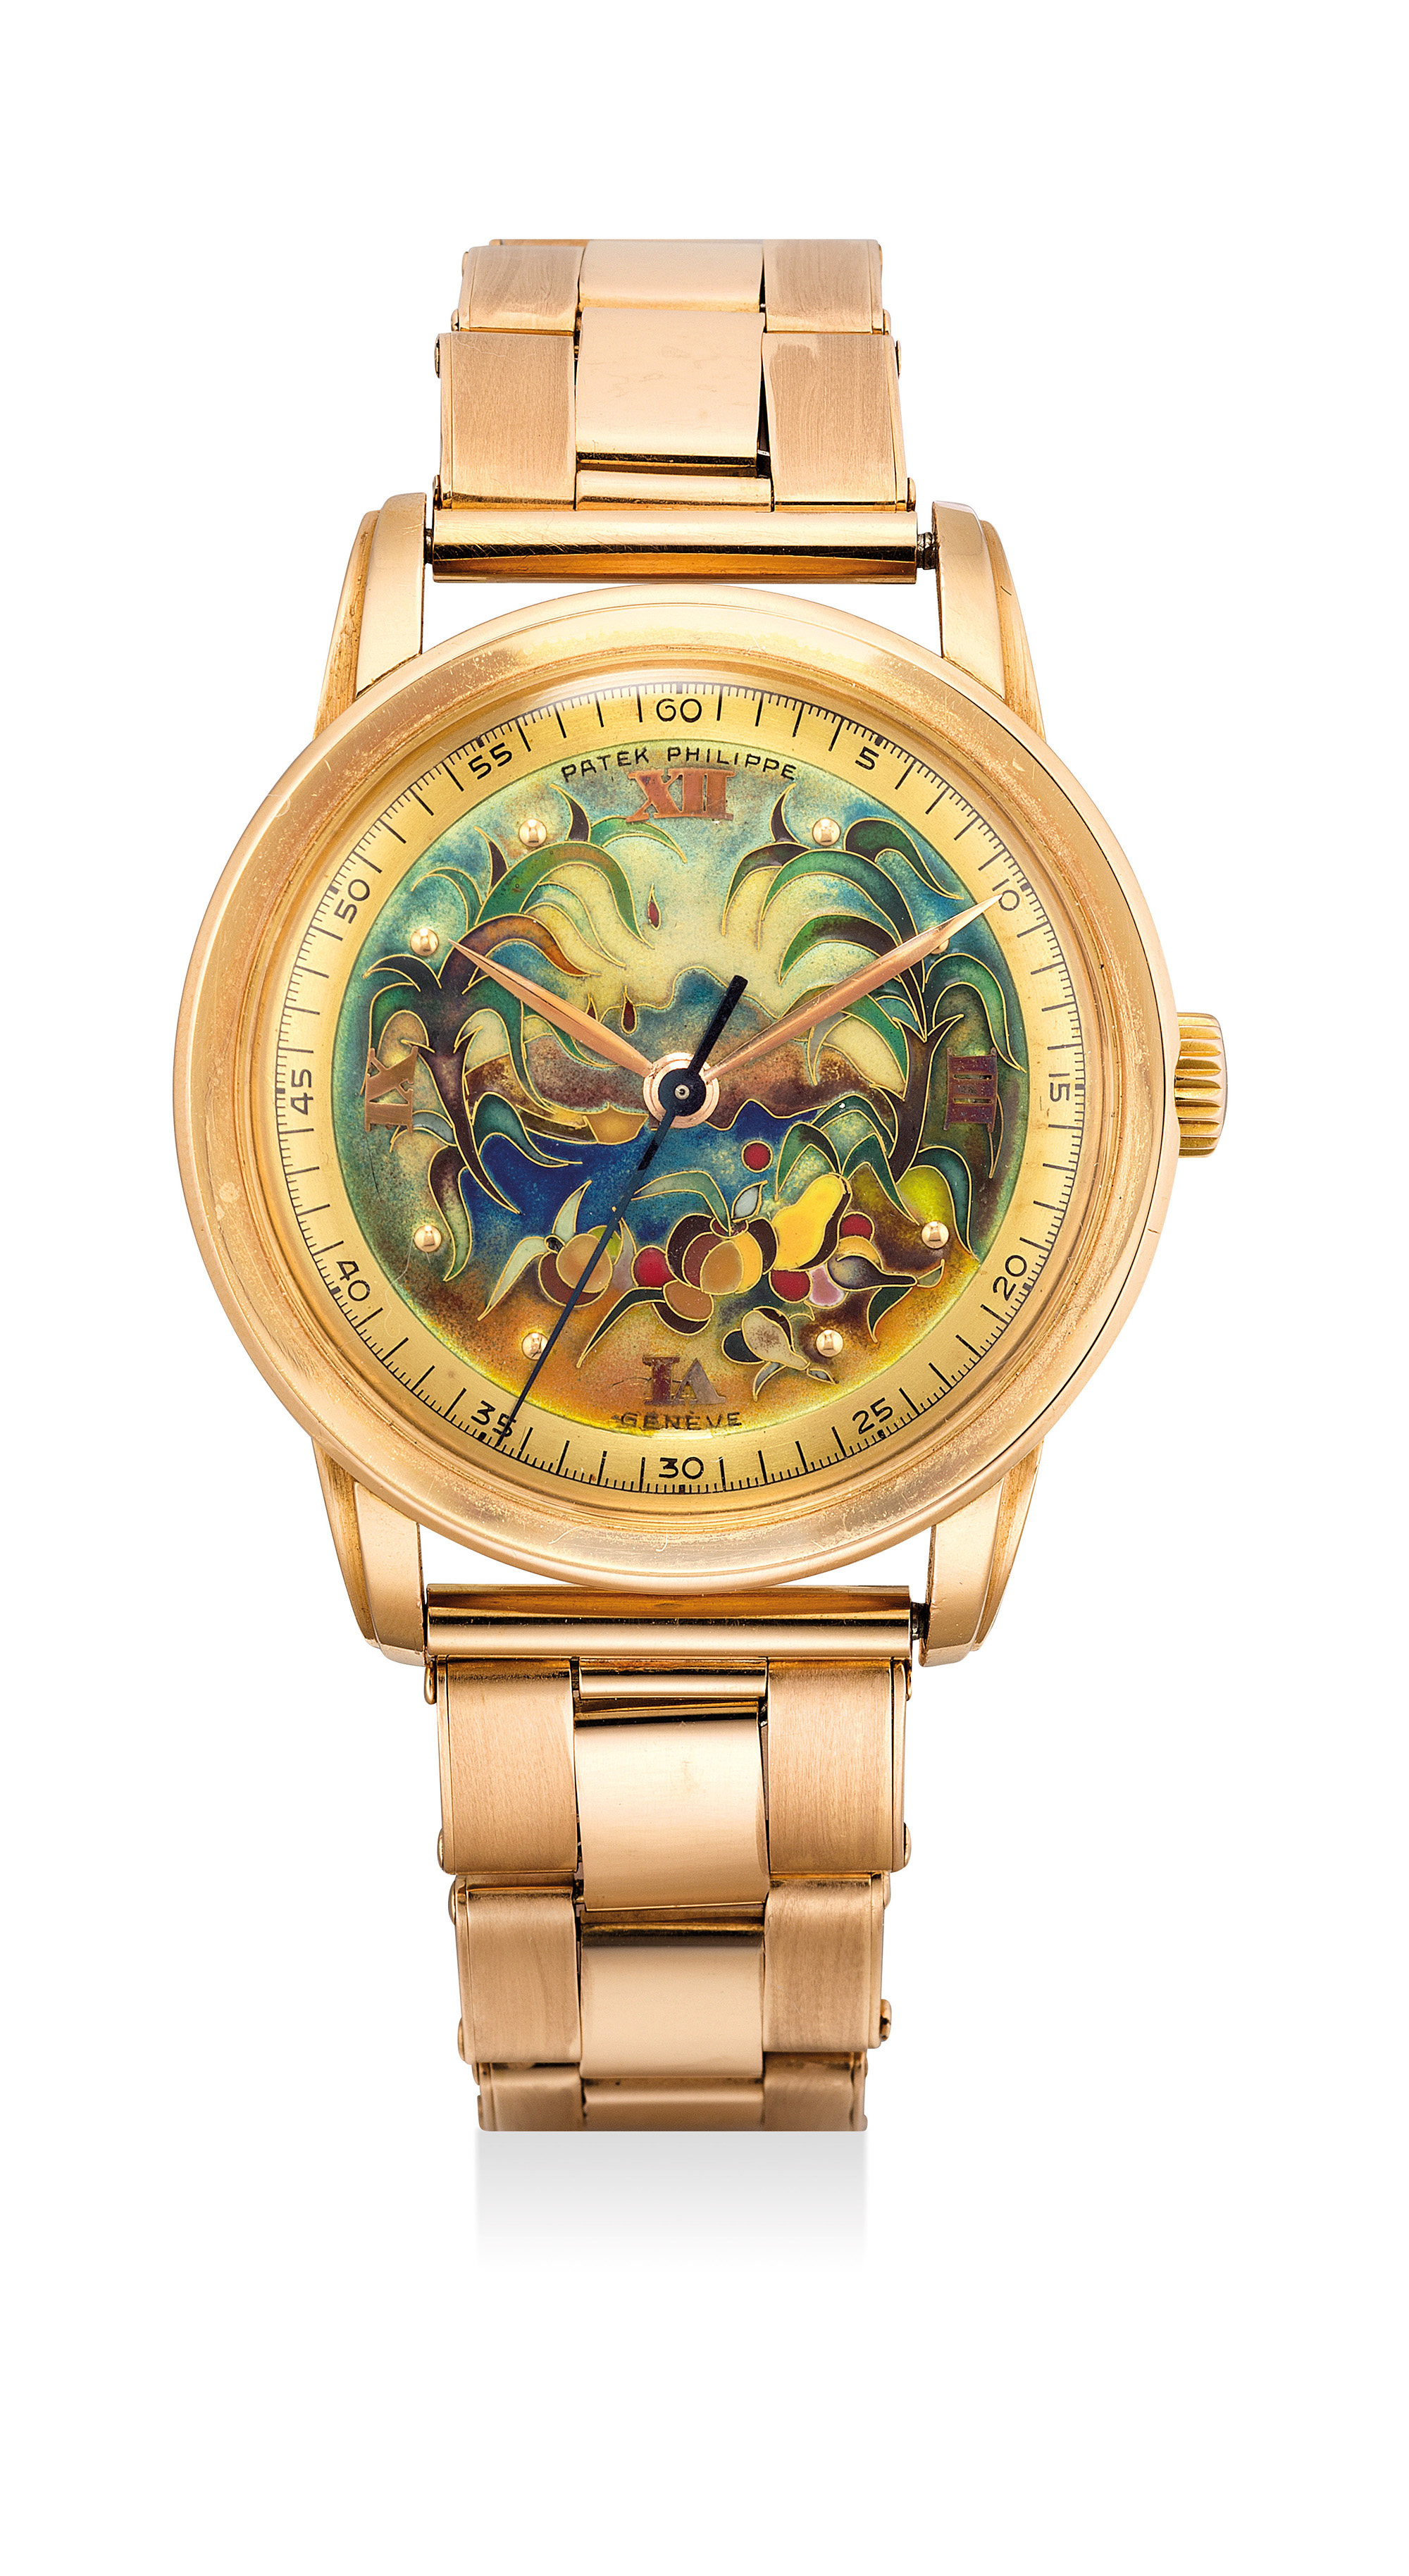 An extremely fine and important pink gold wristwatch with ‘Jungle’ cloisonné enamel dial and Gay Frères bracelet, reference 2481, manufactured in 1951